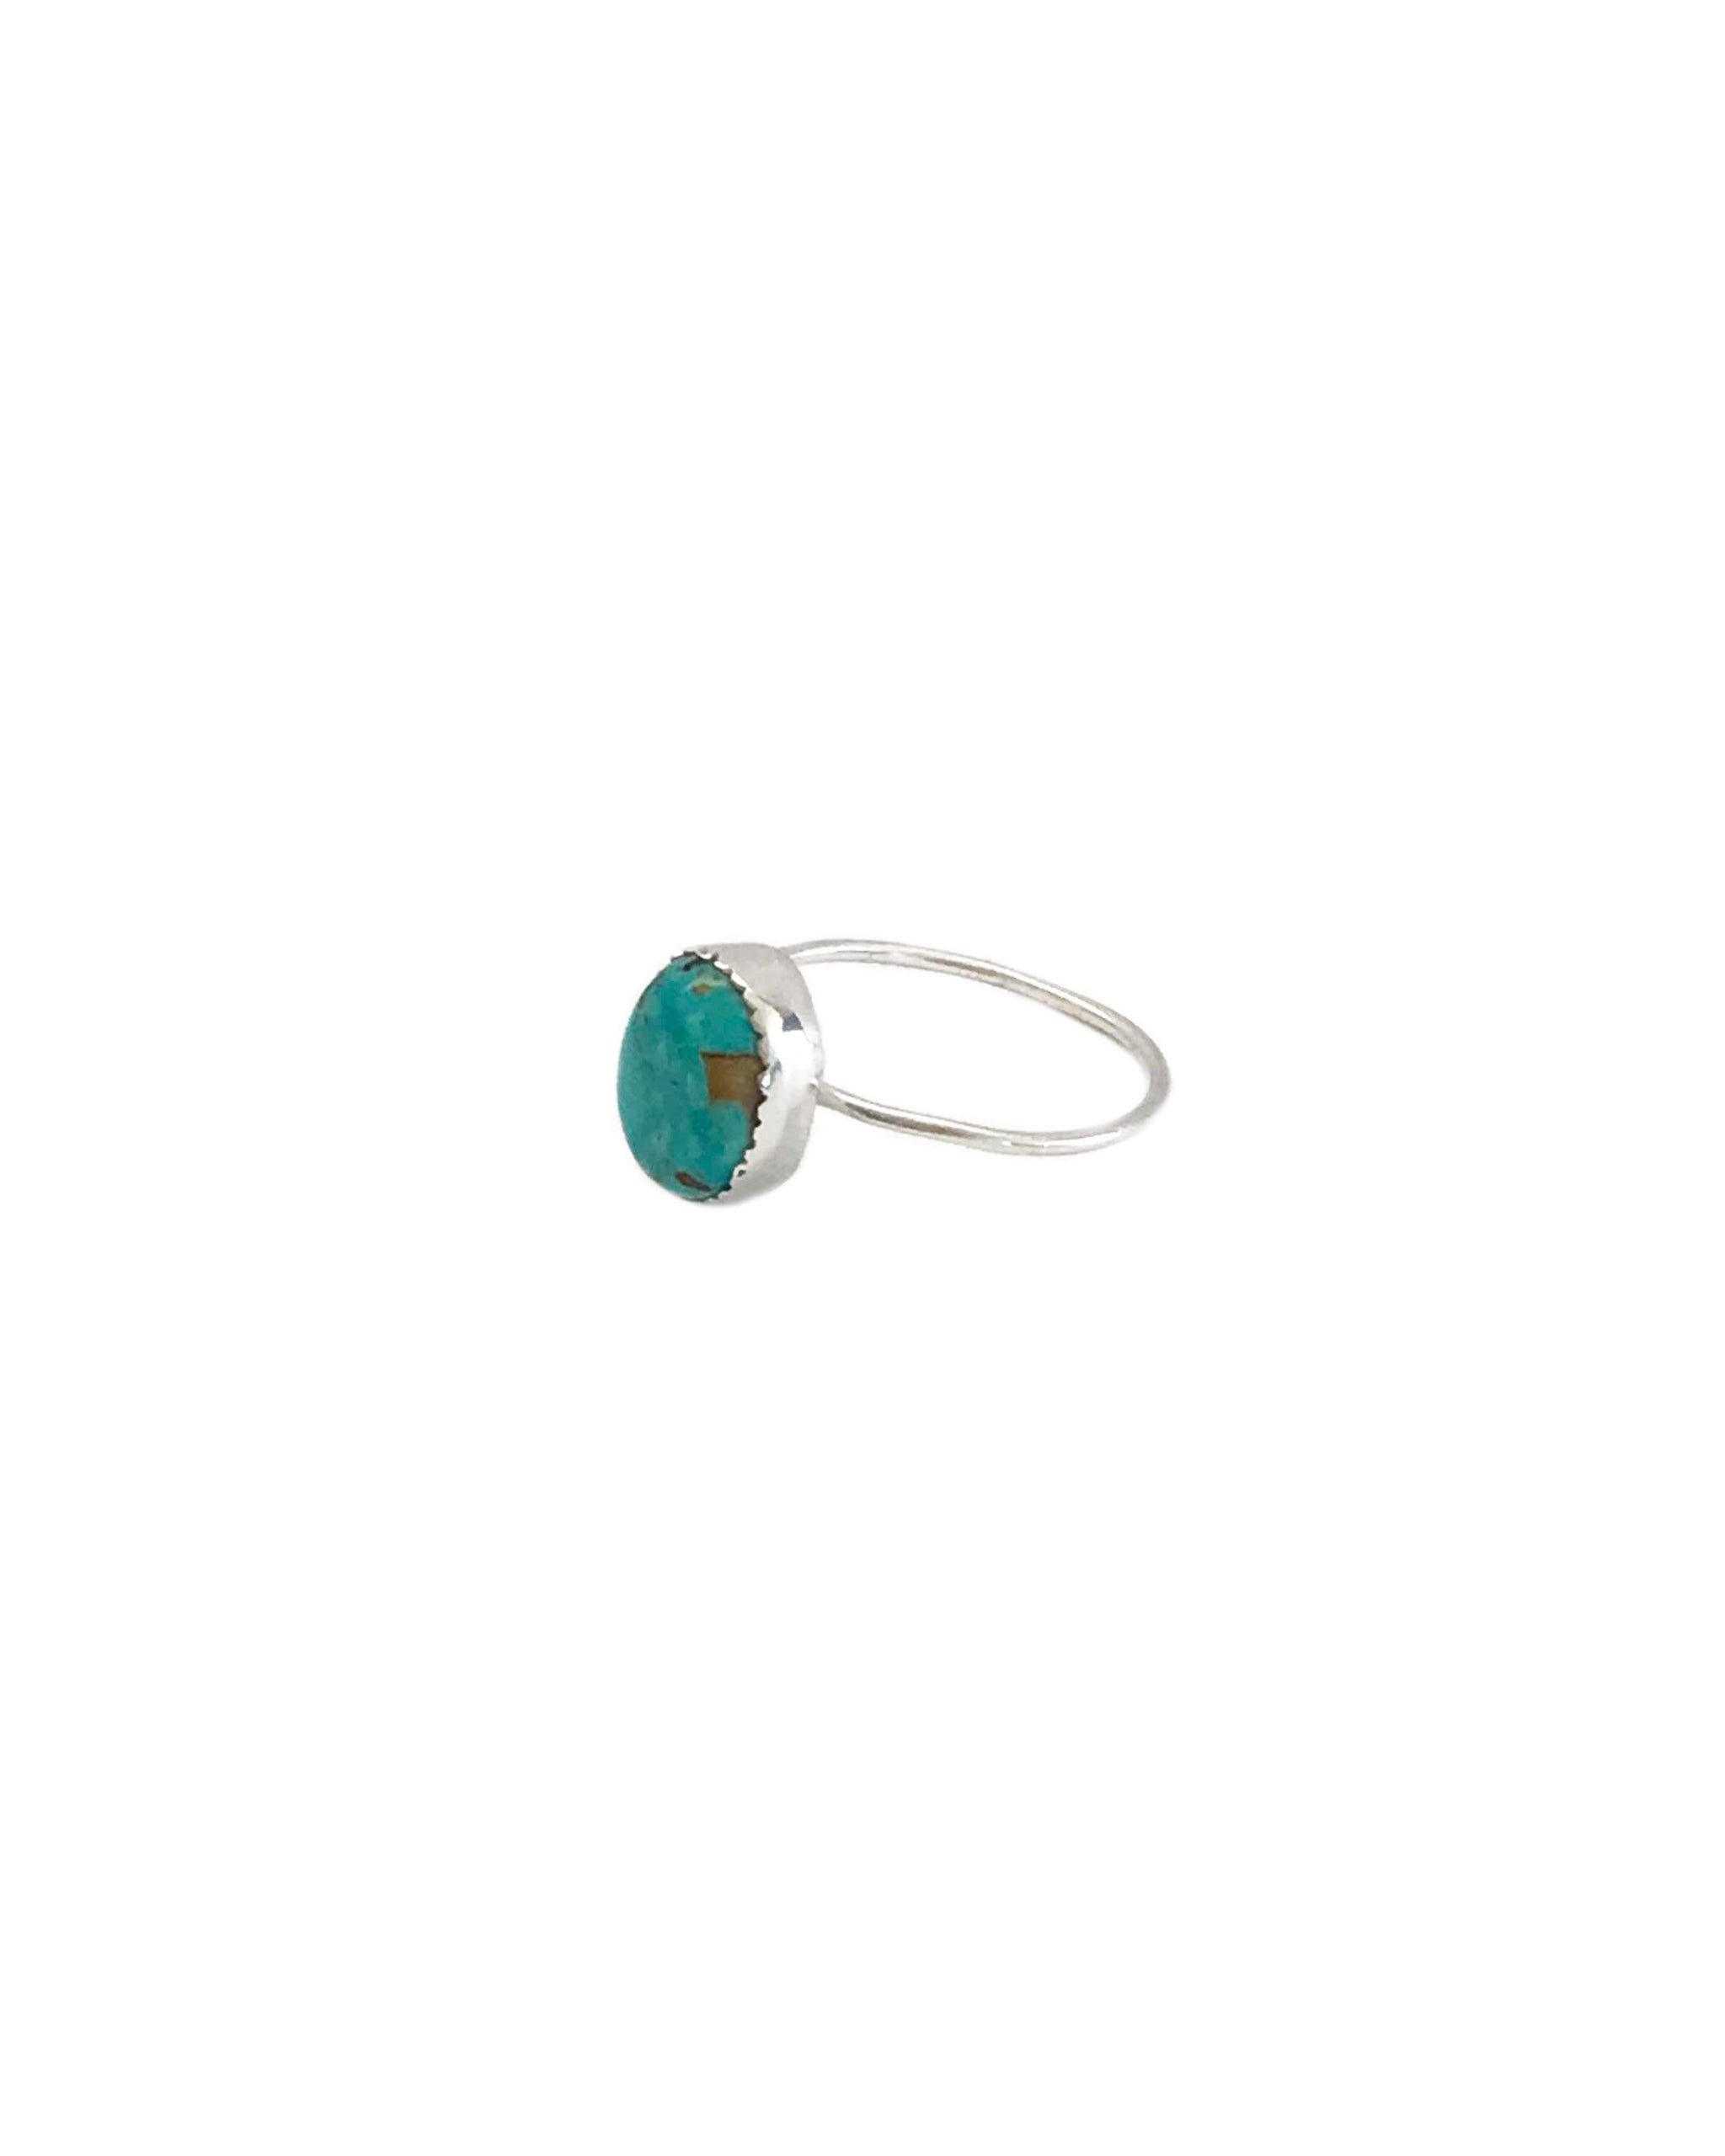 MOON DUST RING - TURQUOISE + TOBACCO